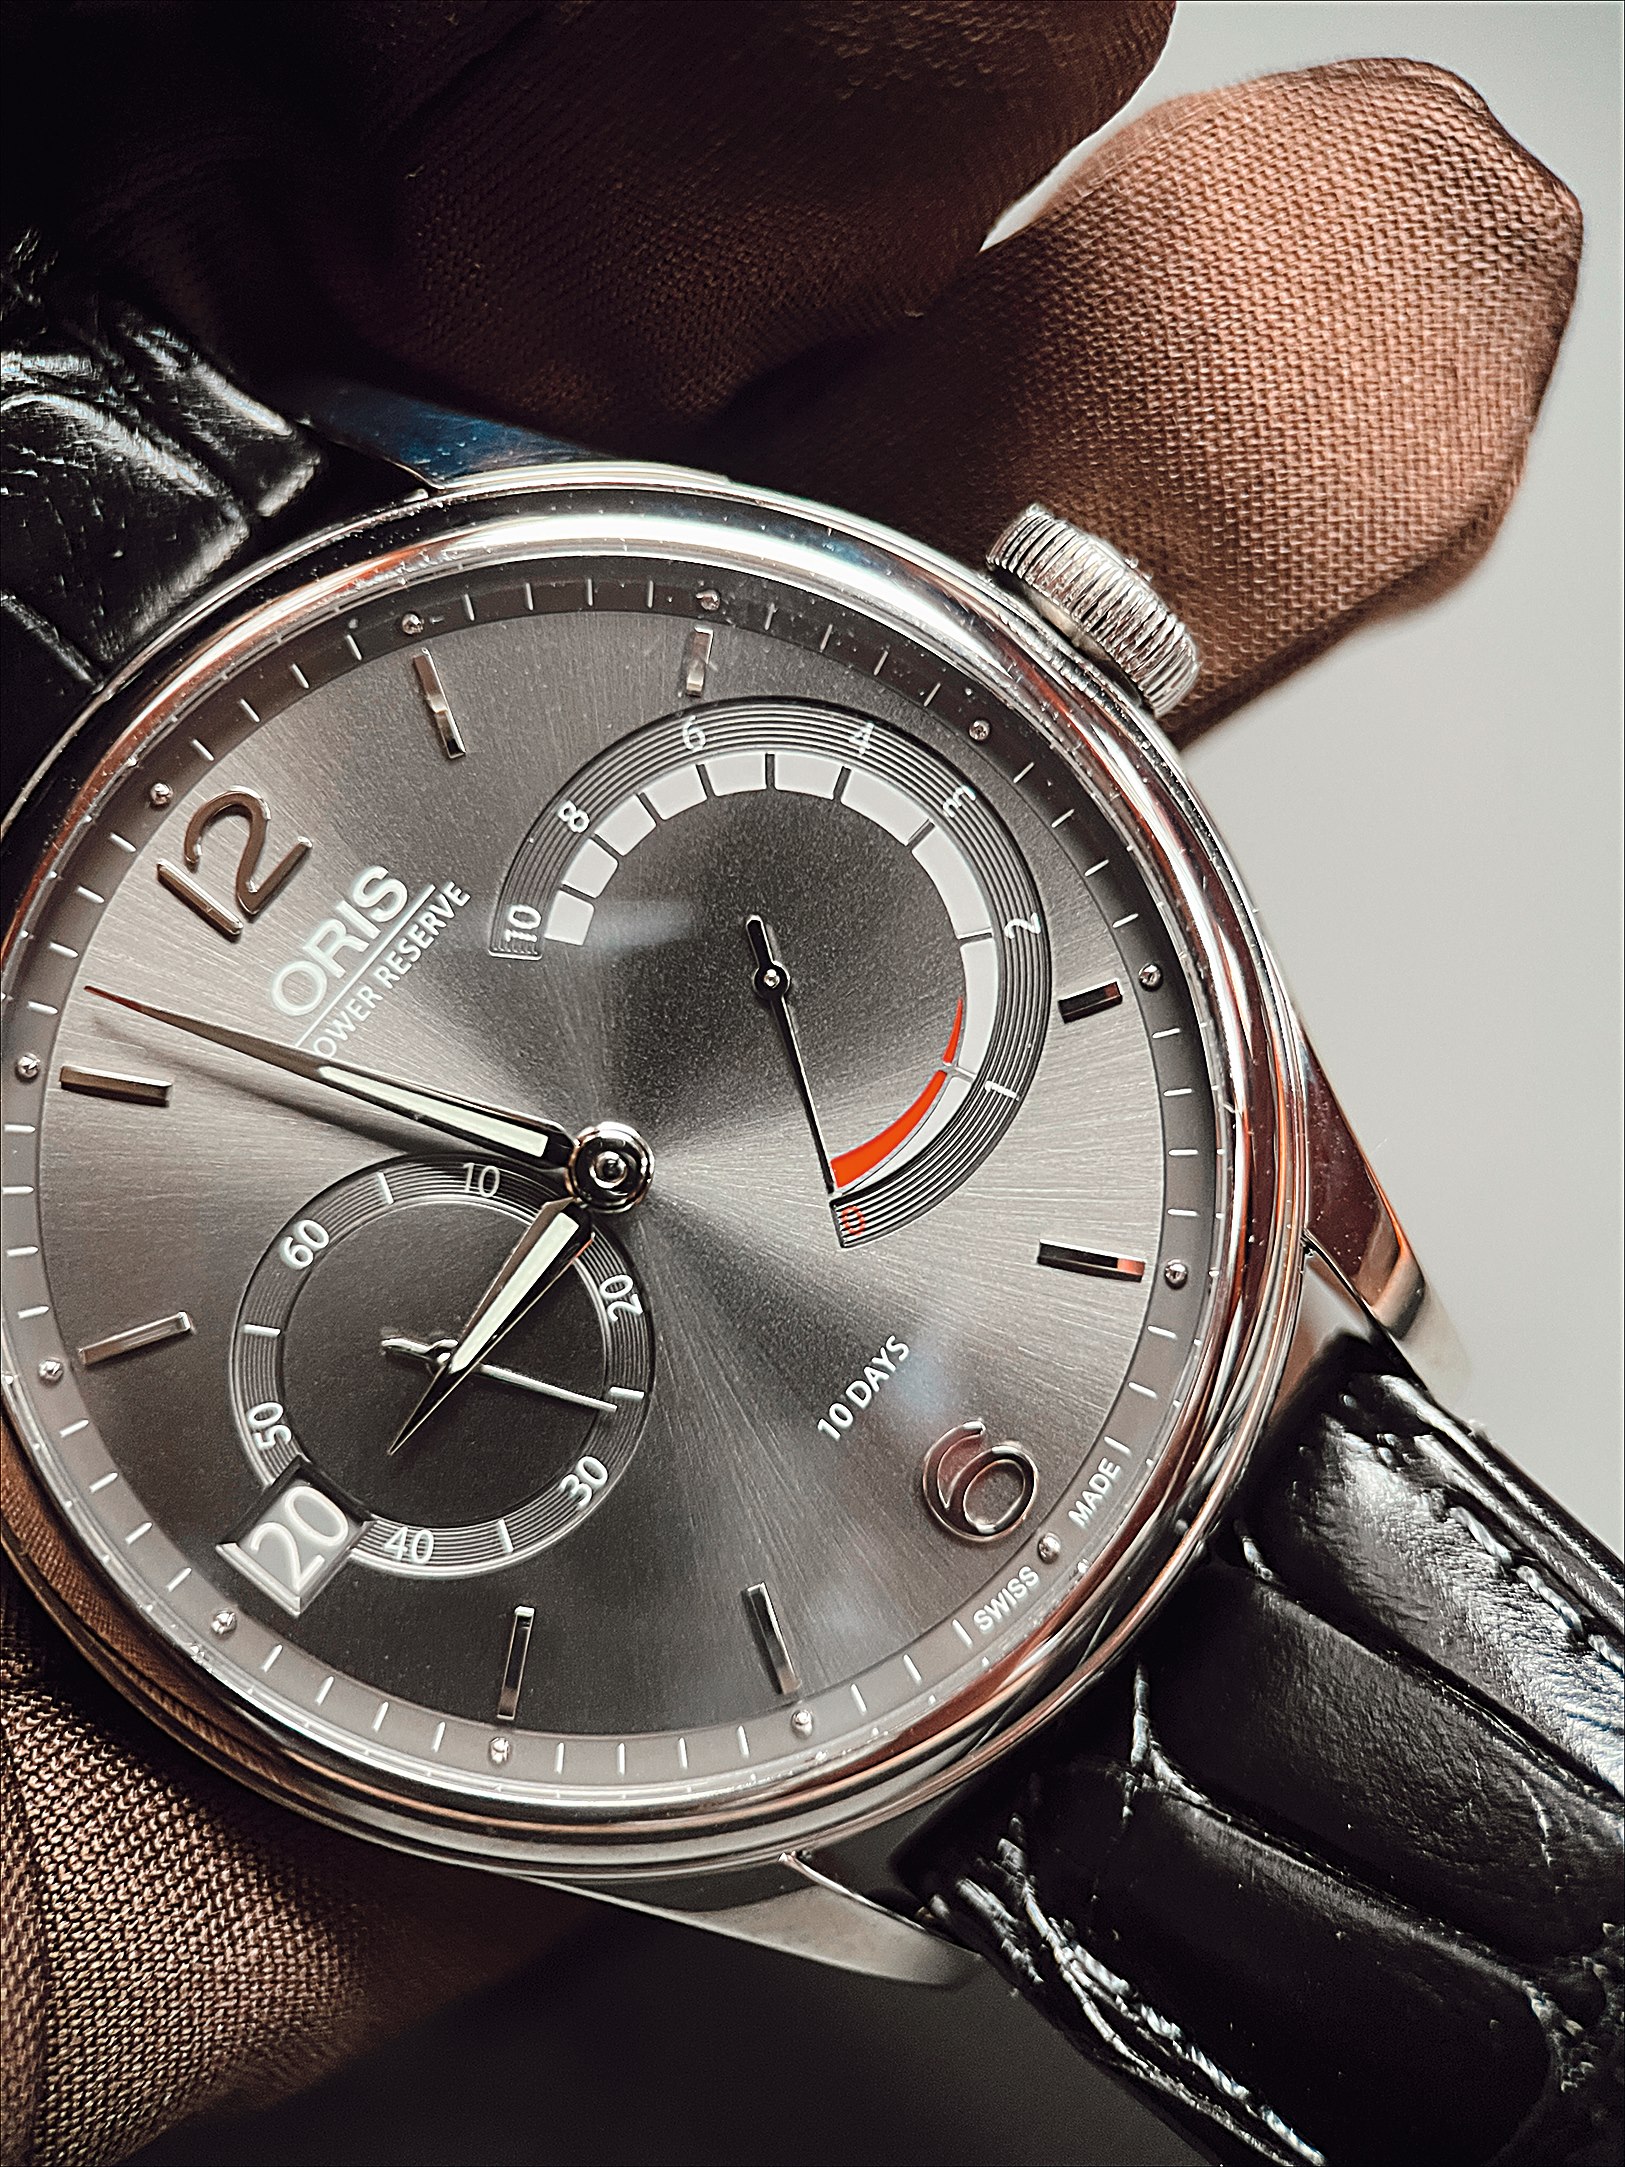 This Oris watch has a ten day power reserve, which means the hairsping is both extremely thin and extremely long